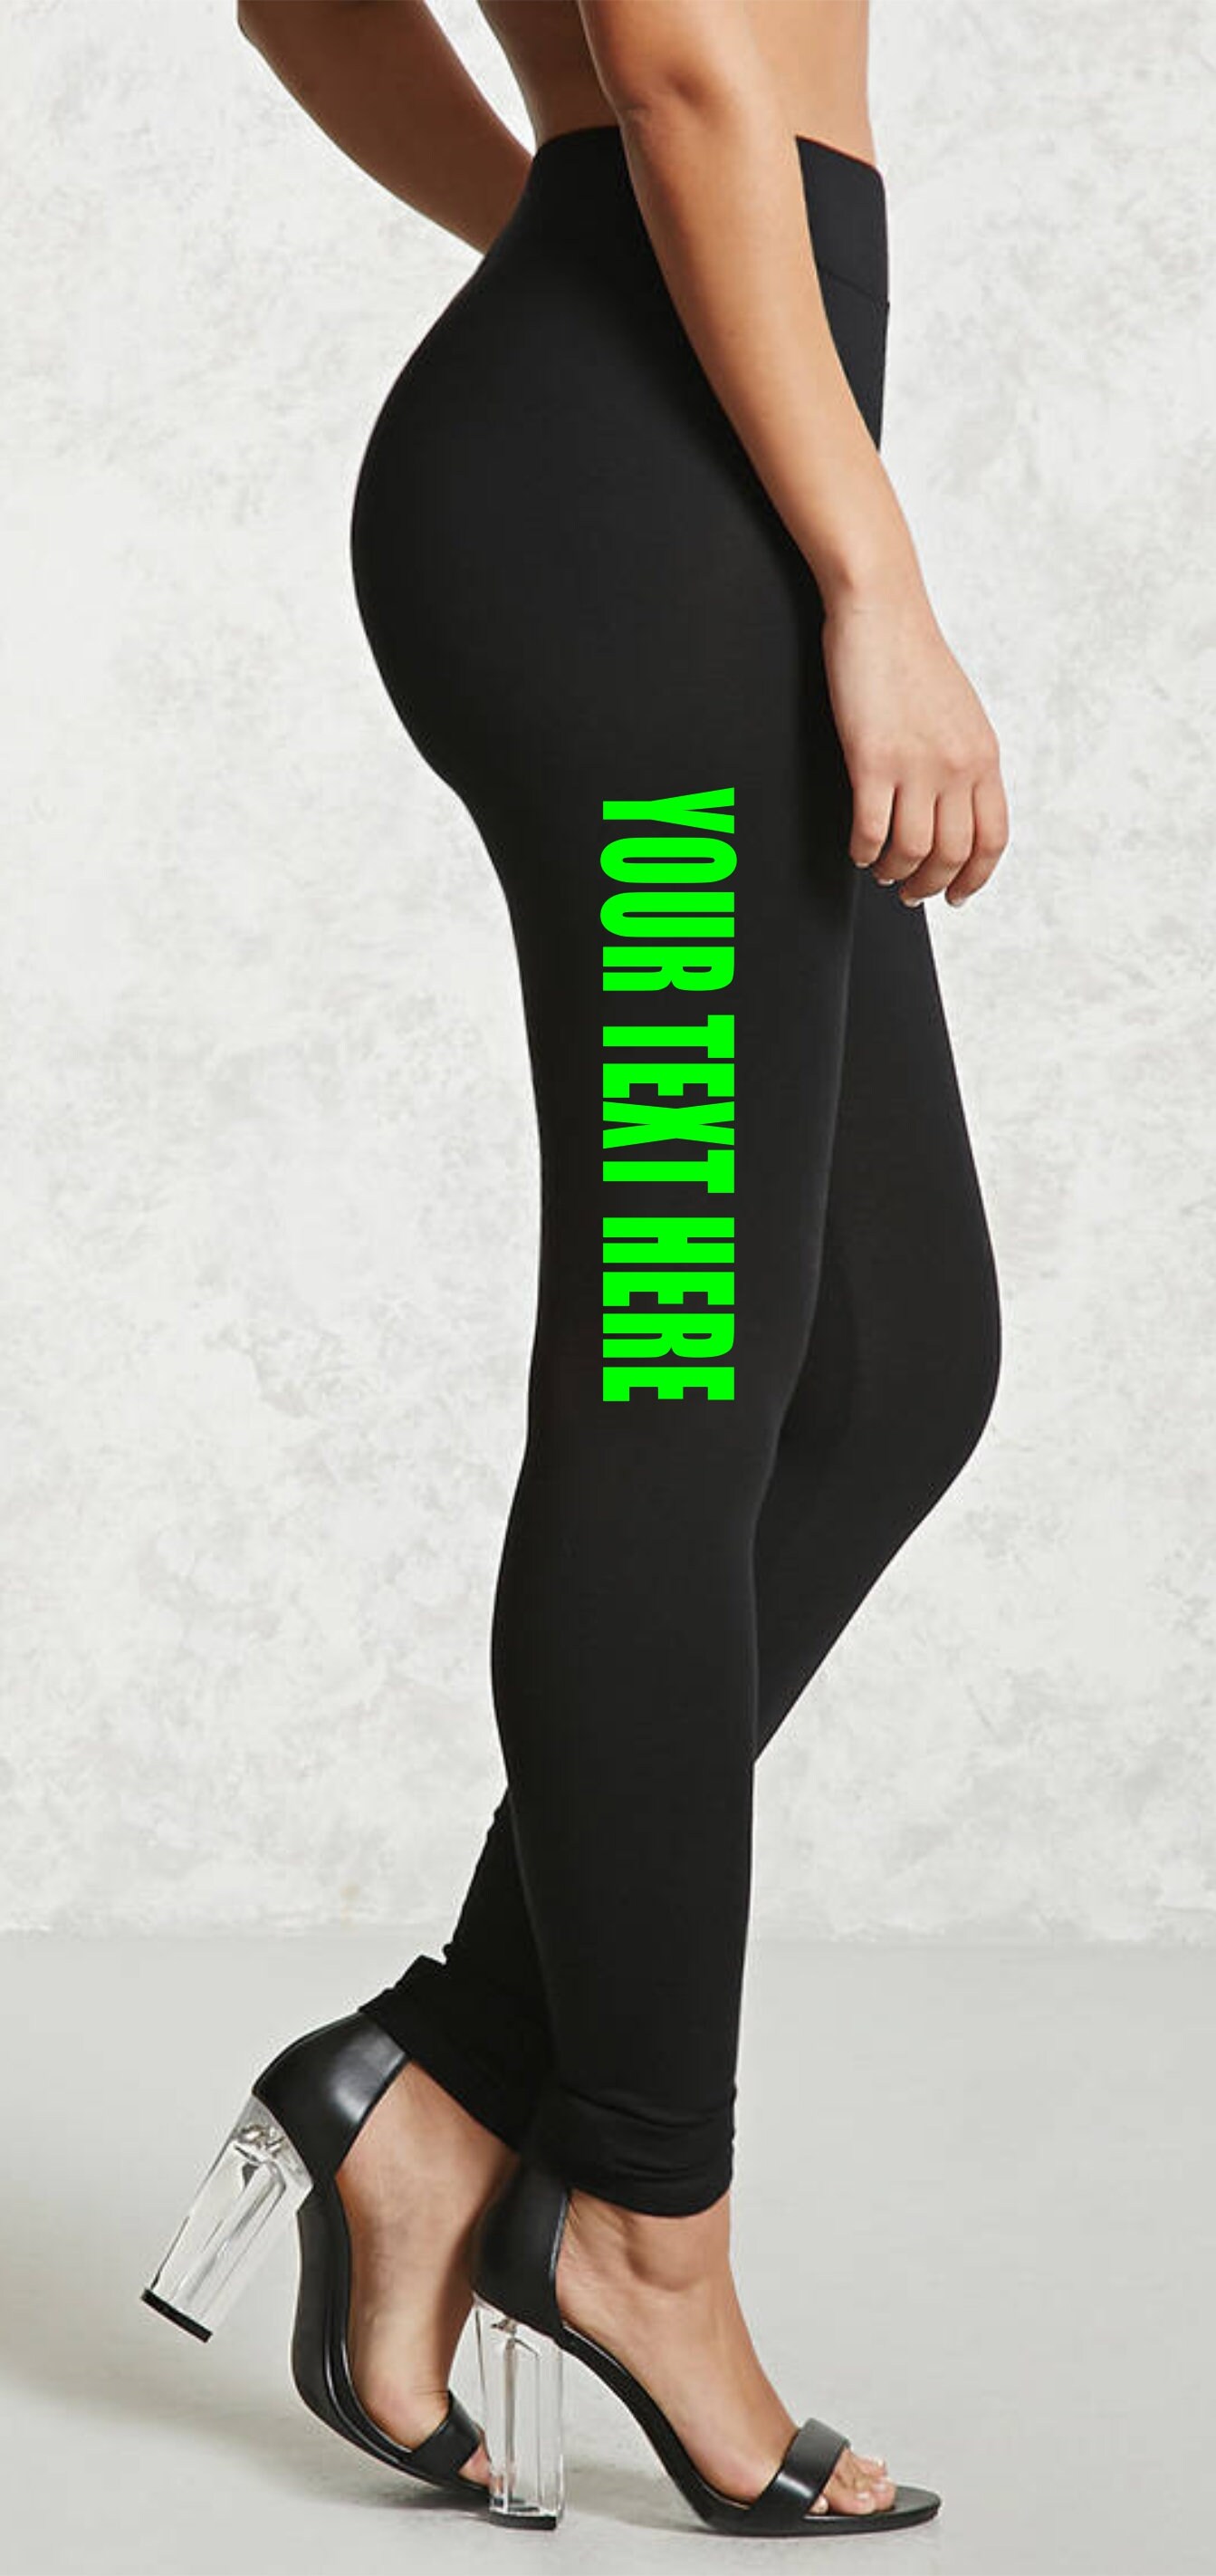 CUSTOM LEGGINGS Black Pants Workout Yoga Gym Side Leg Your Text Here  Personalized Customized Printed Funny Wife Gift Team Bride Party 